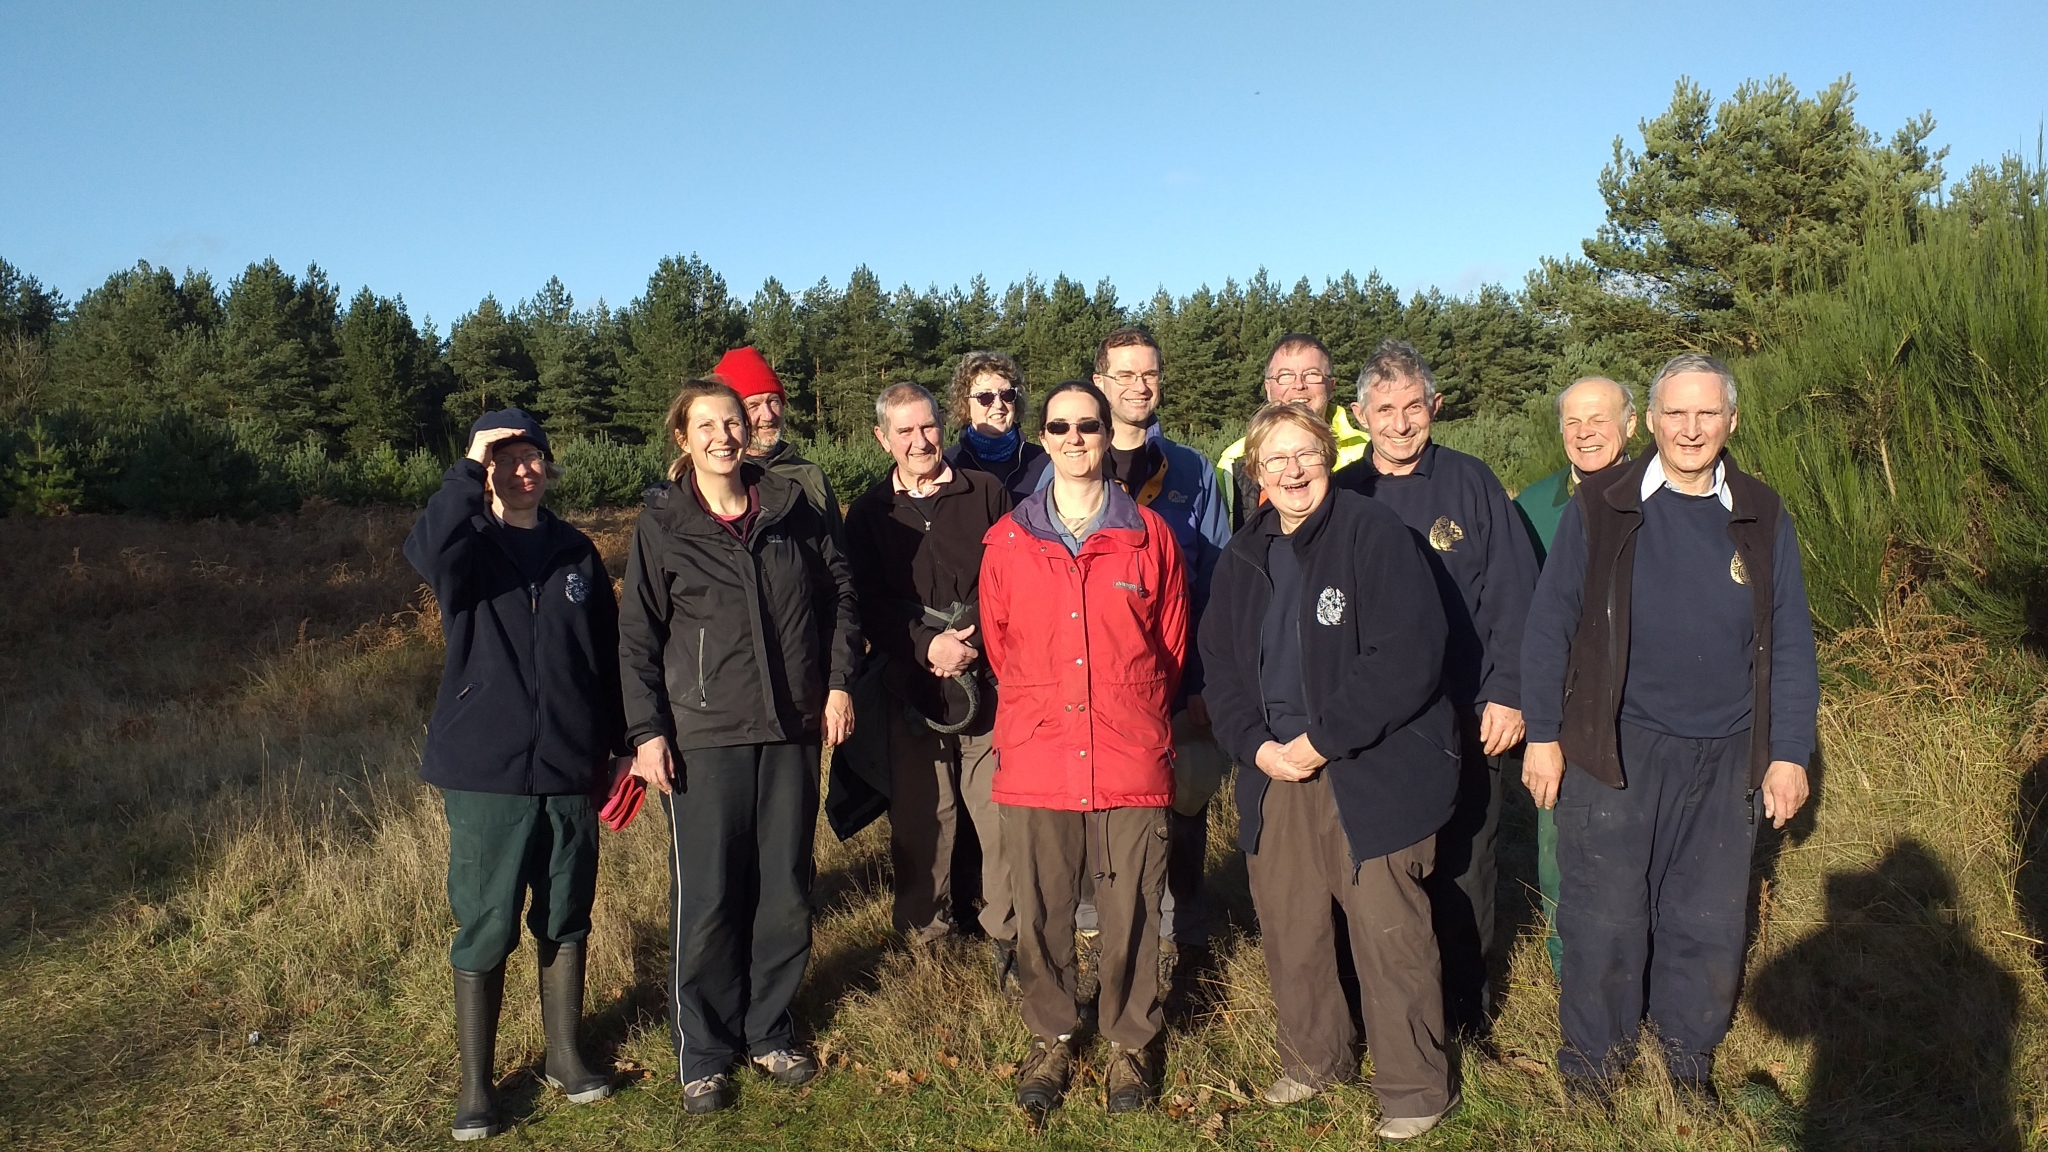 A photo from the FoTF Conservation Event - December 2019 - Self Seeded Pine Tree Removal on the Goshawk Trail : A group photo of the volunteers